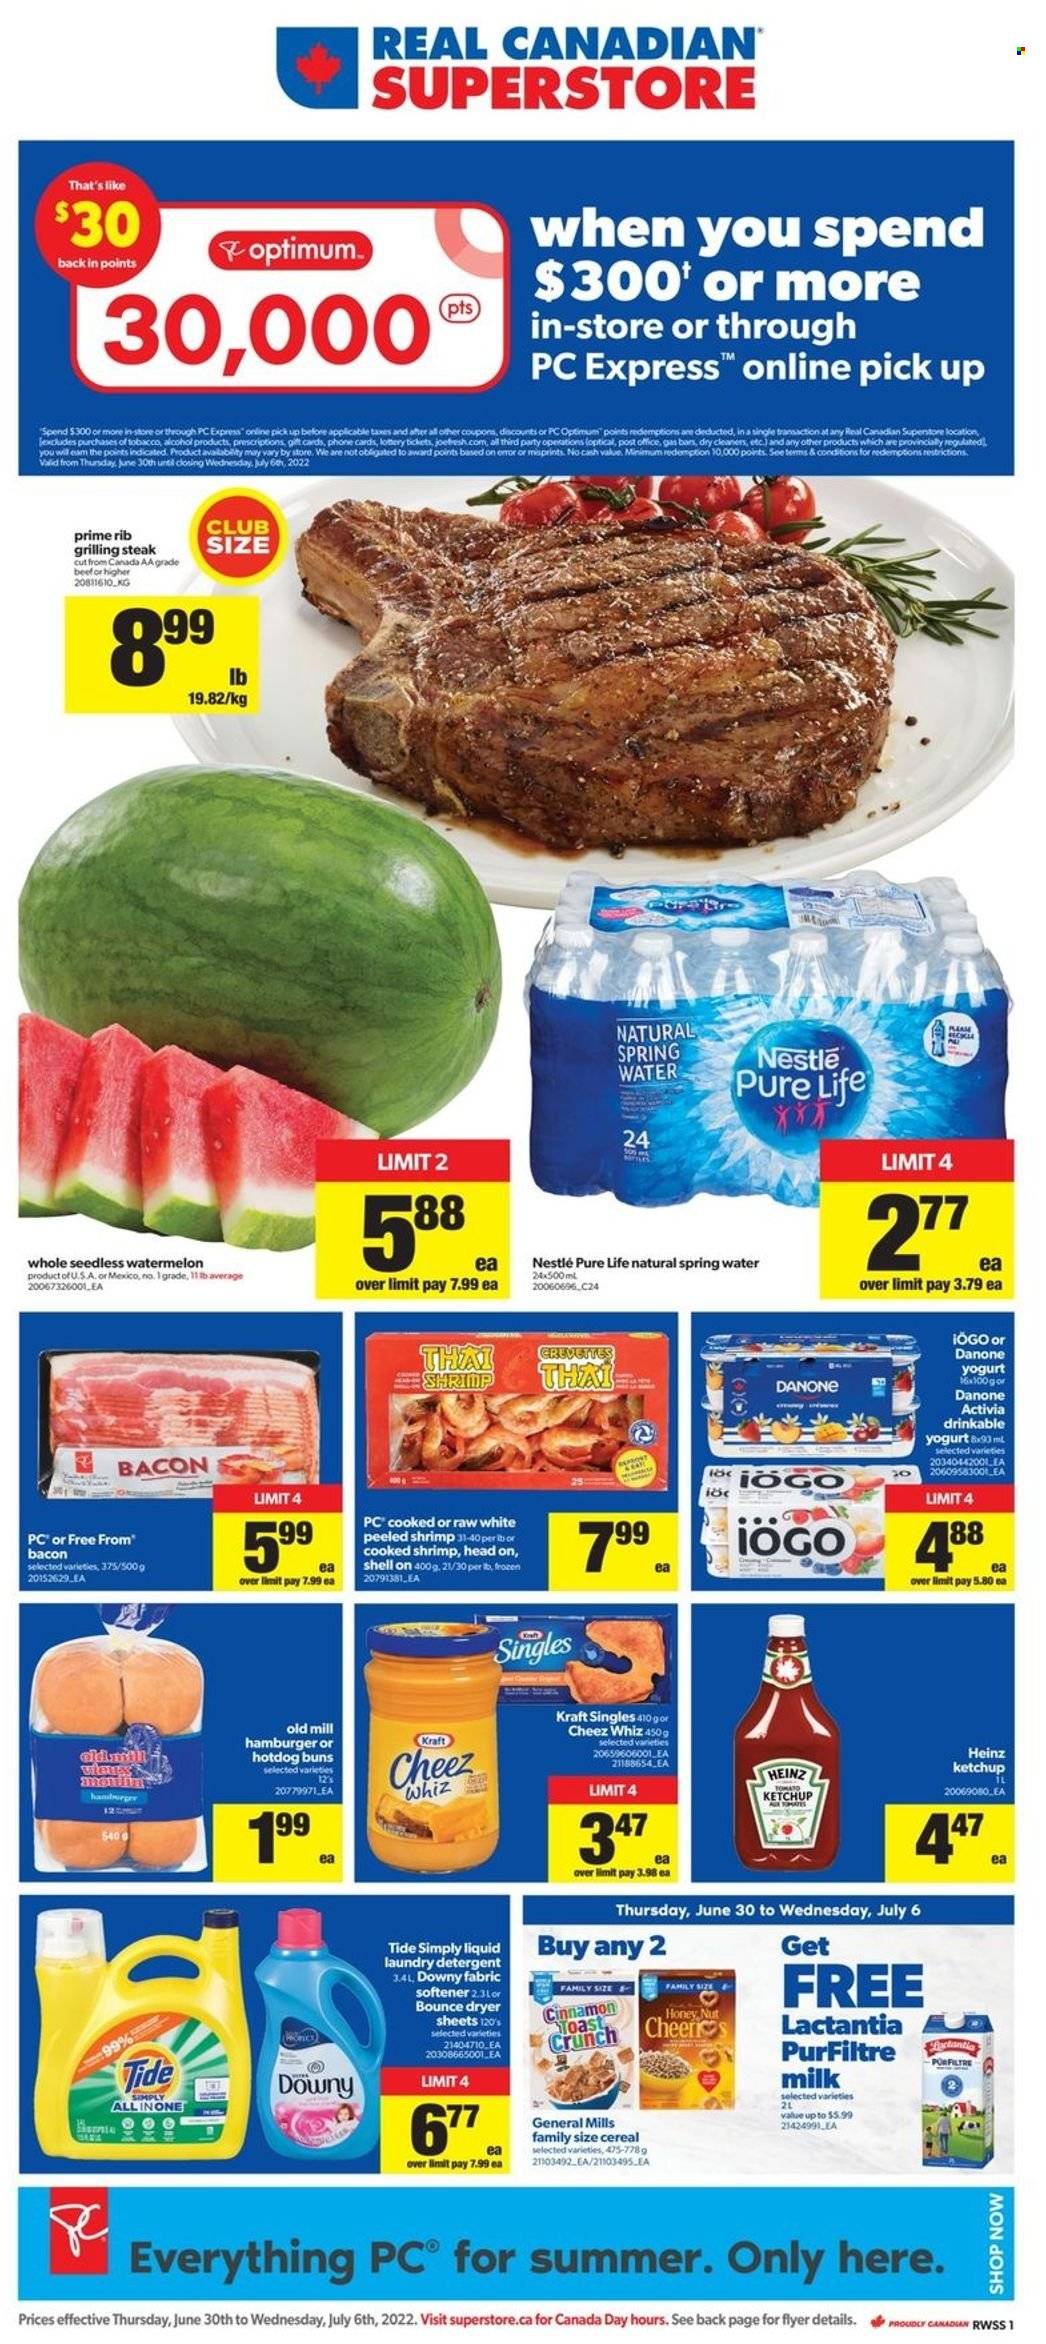 thumbnail - Real Canadian Superstore Flyer - June 30, 2022 - July 06, 2022 - Sales products - hot dog rolls, buns, watermelon, hamburger, Kraft®, bacon, sandwich slices, Kraft Singles, yoghurt, Activia, milk, cereals, cinnamon, spring water, alcohol, Tide, fabric softener, laundry detergent, Bounce, dryer sheets, Downy Laundry, Optimum, detergent, Nestlé, Heinz, ketchup, steak, Danone. Page 1.